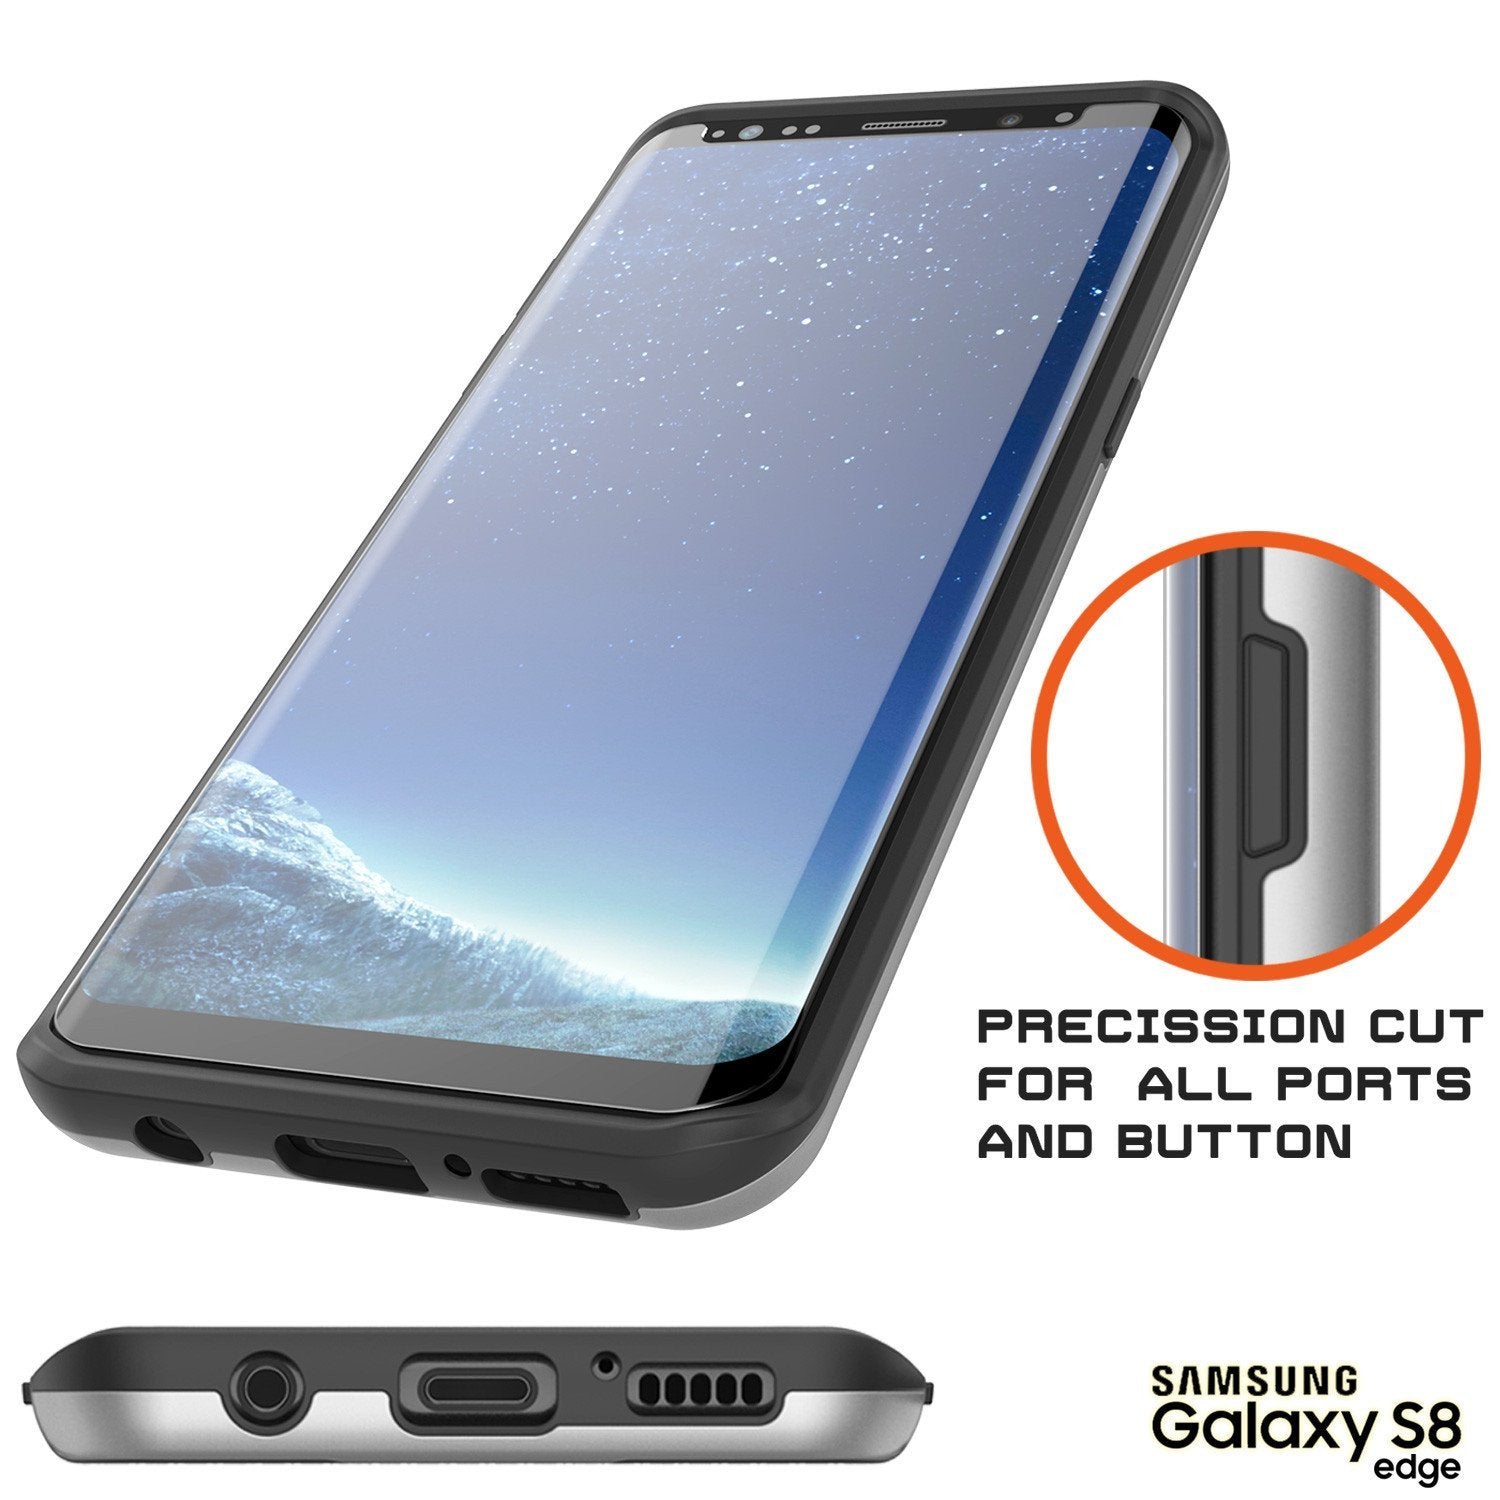 Galaxy S8 Case, PUNKcase [SLOT Series] [Slim Fit] Dual-Layer Armor Cover w/Integrated Anti-Shock System, Credit Card Slot & PUNKSHIELD Screen Protector for Samsung Galaxy S8 [Silver] - PunkCase NZ